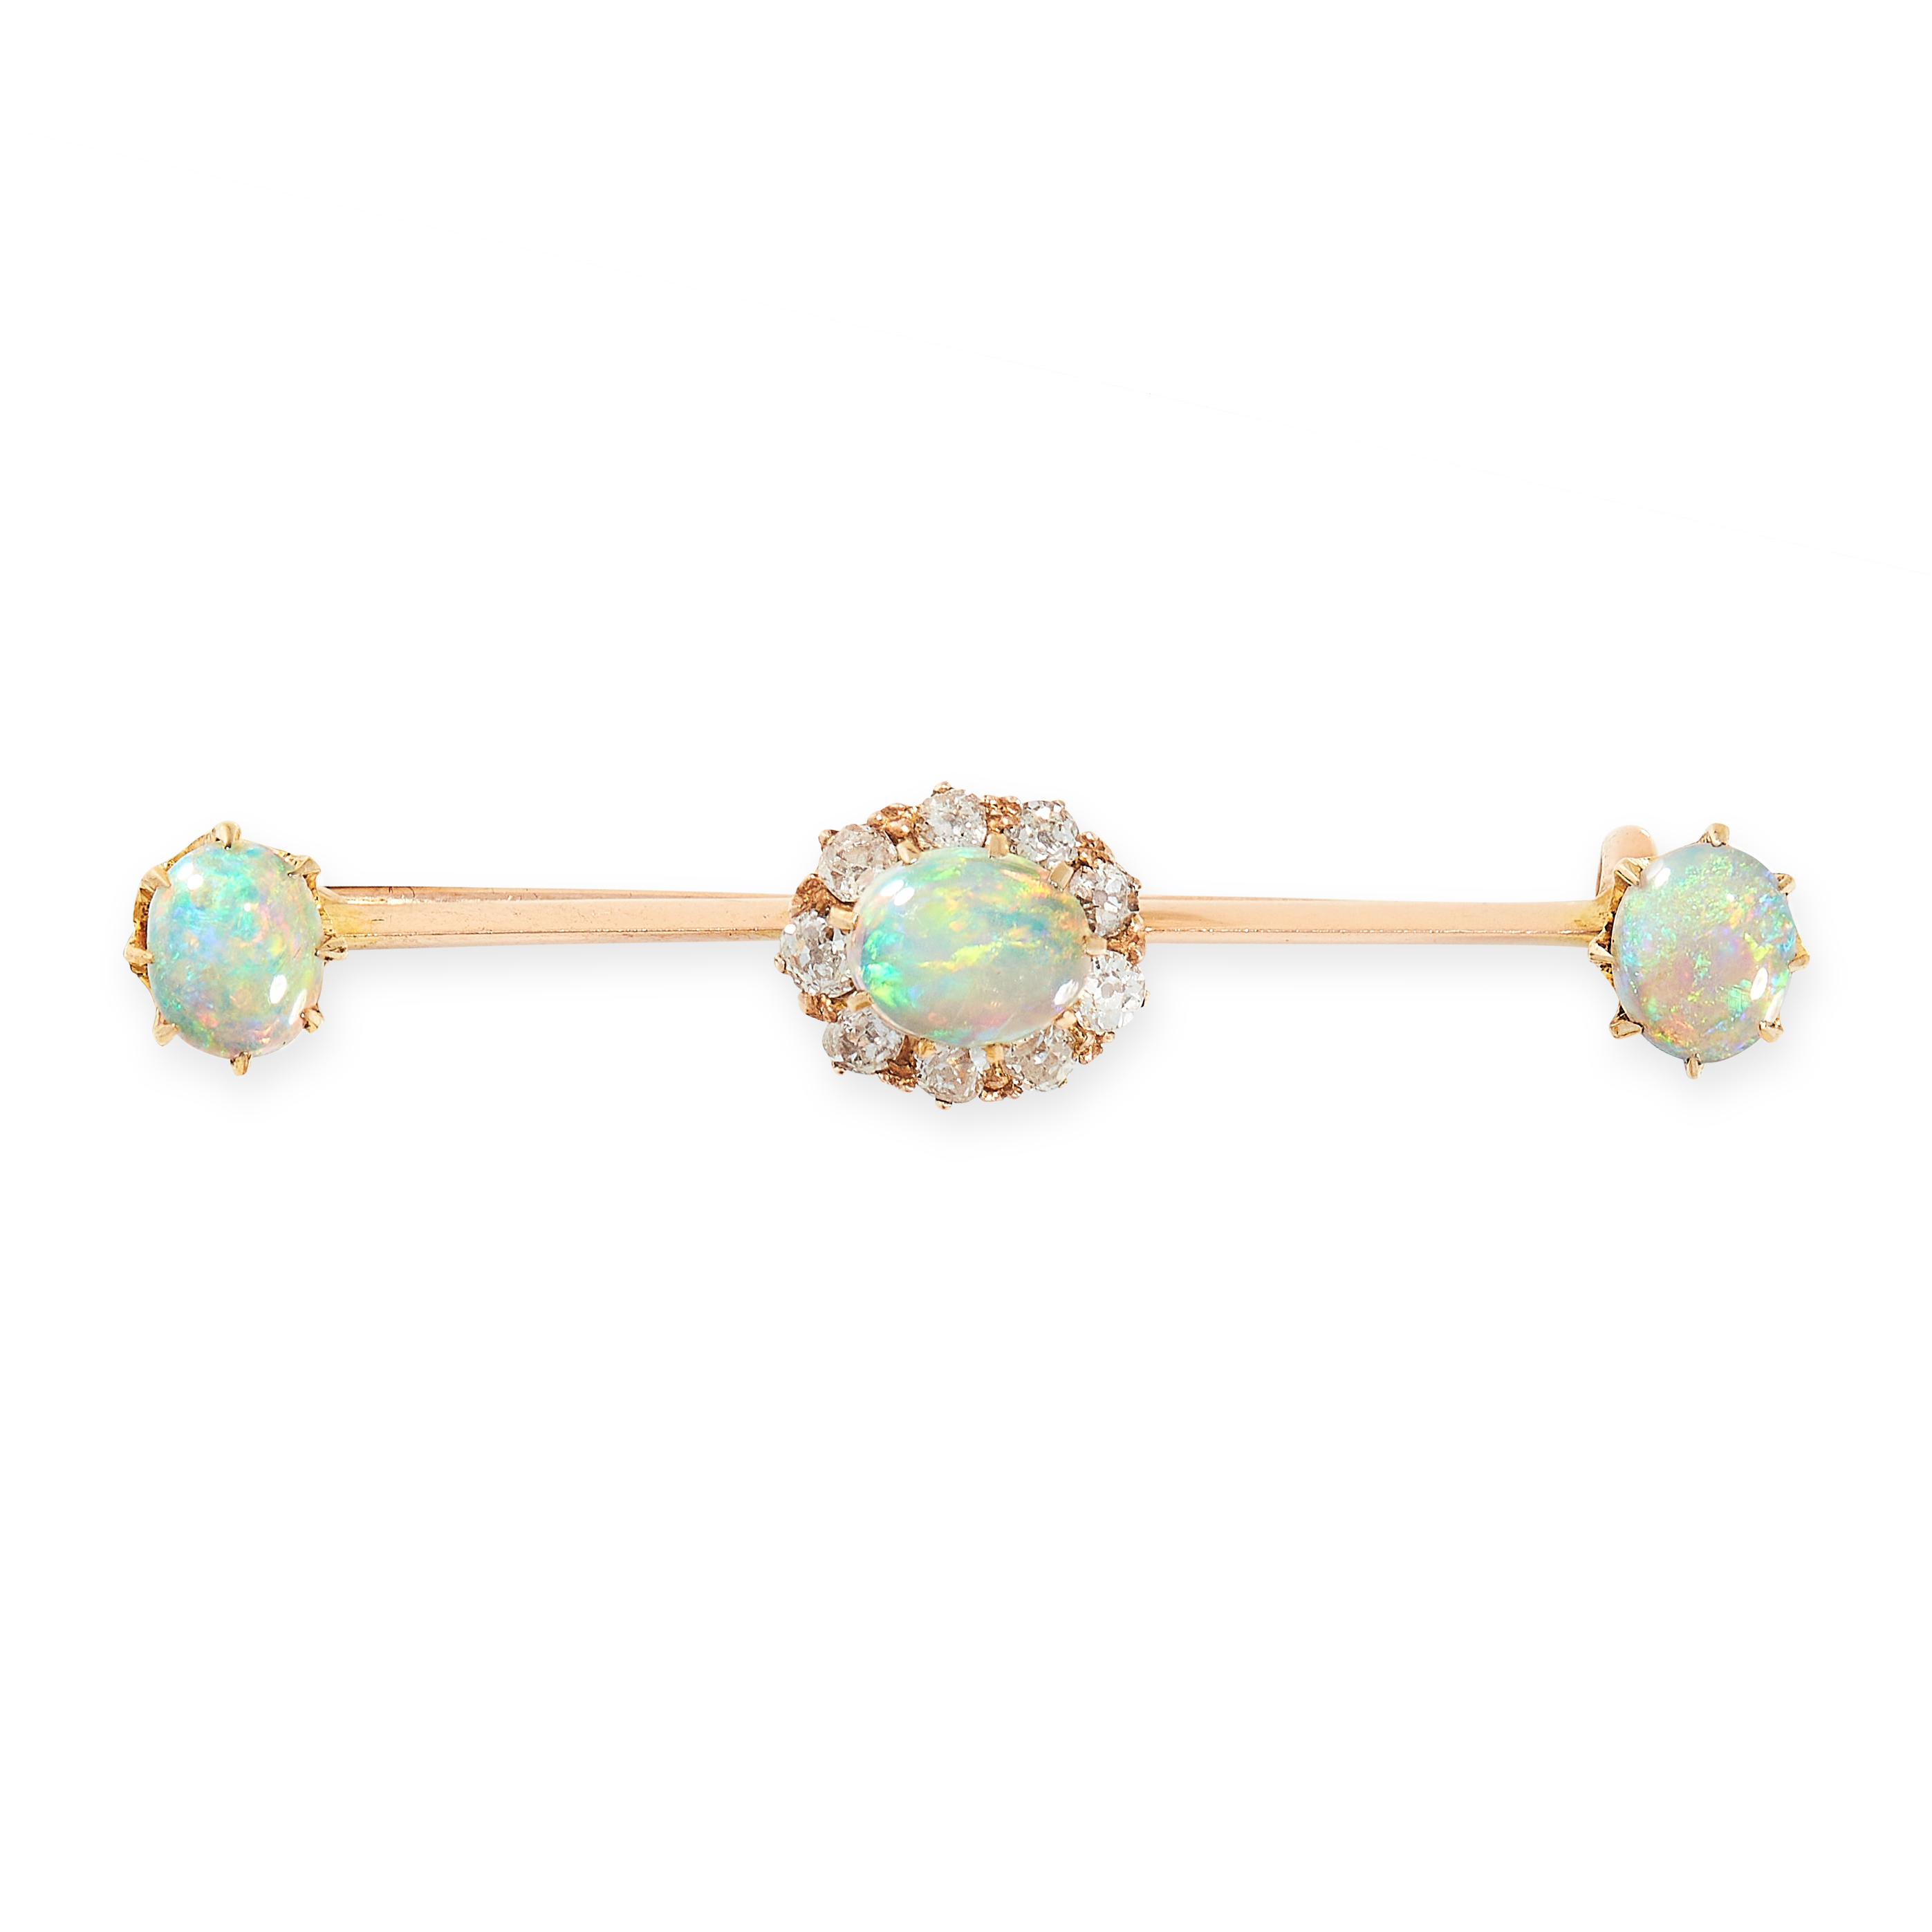 ANTIQUE OPAL AND DIAMOND BROOCH, 19TH CENTURY in yellow gold, the plain bar set with a central